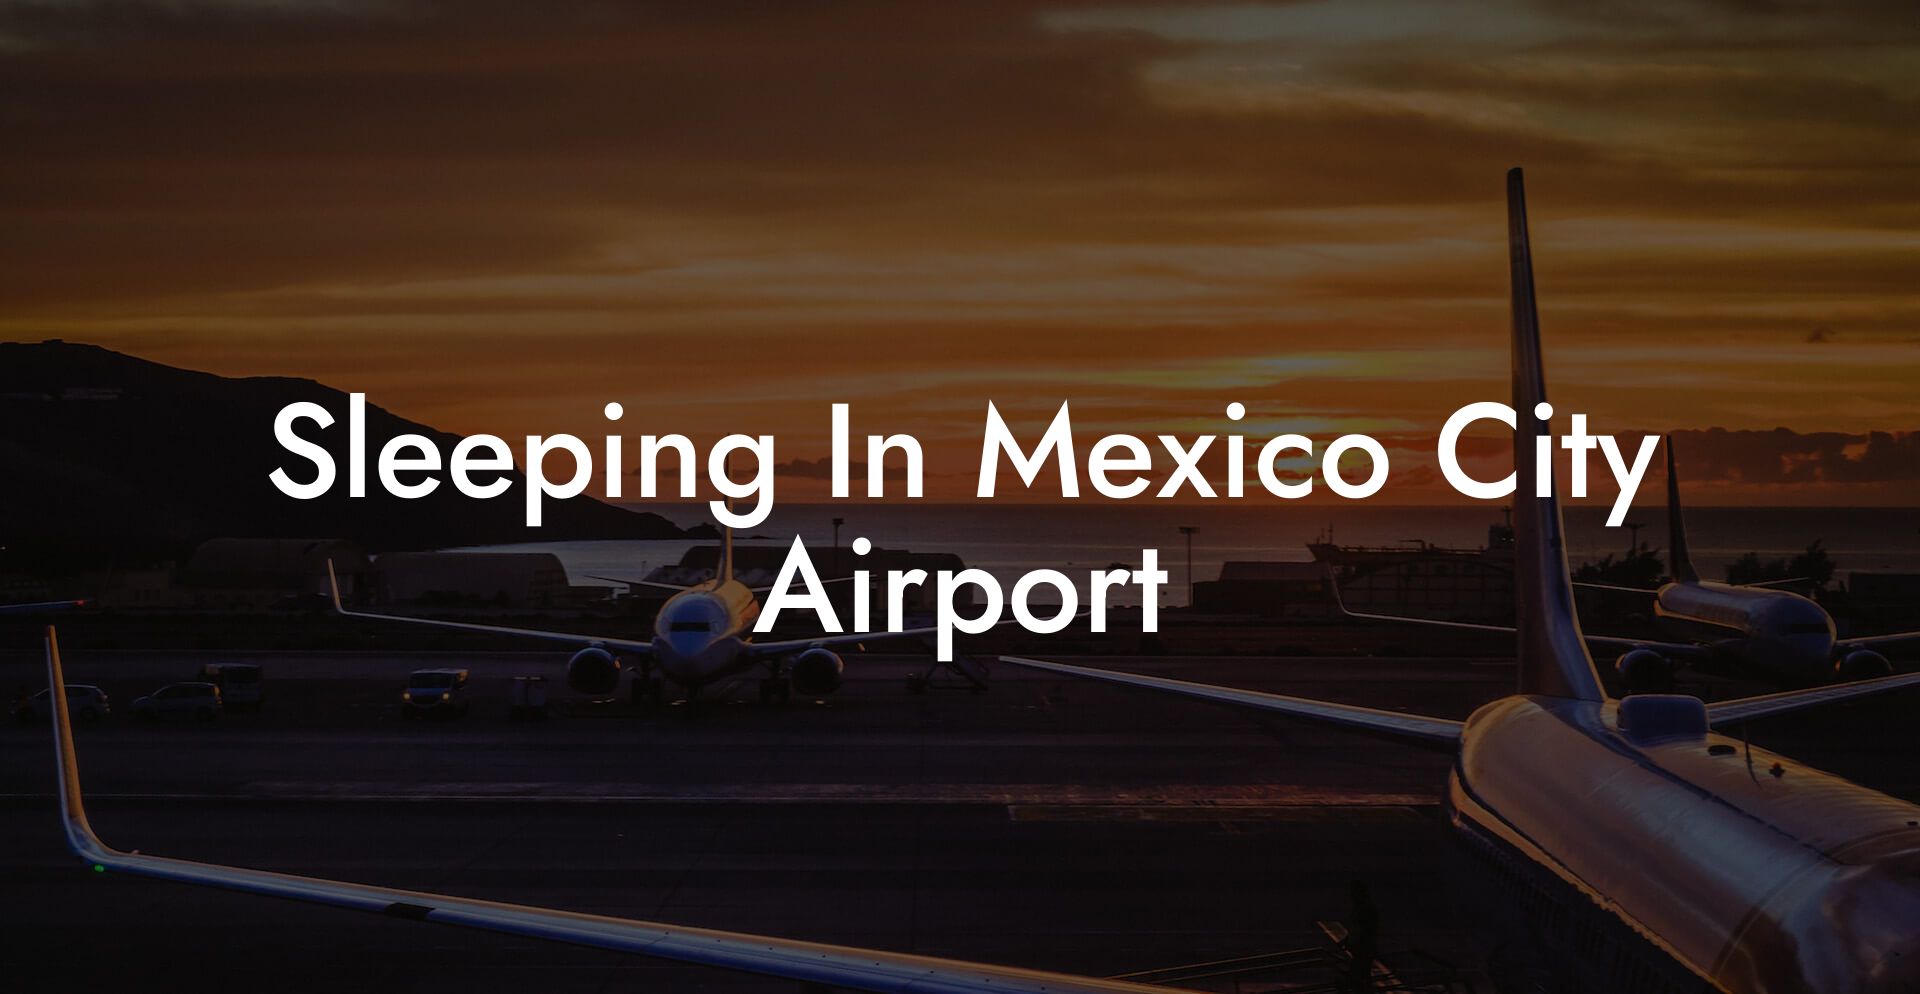 Sleeping In Mexico City Airport